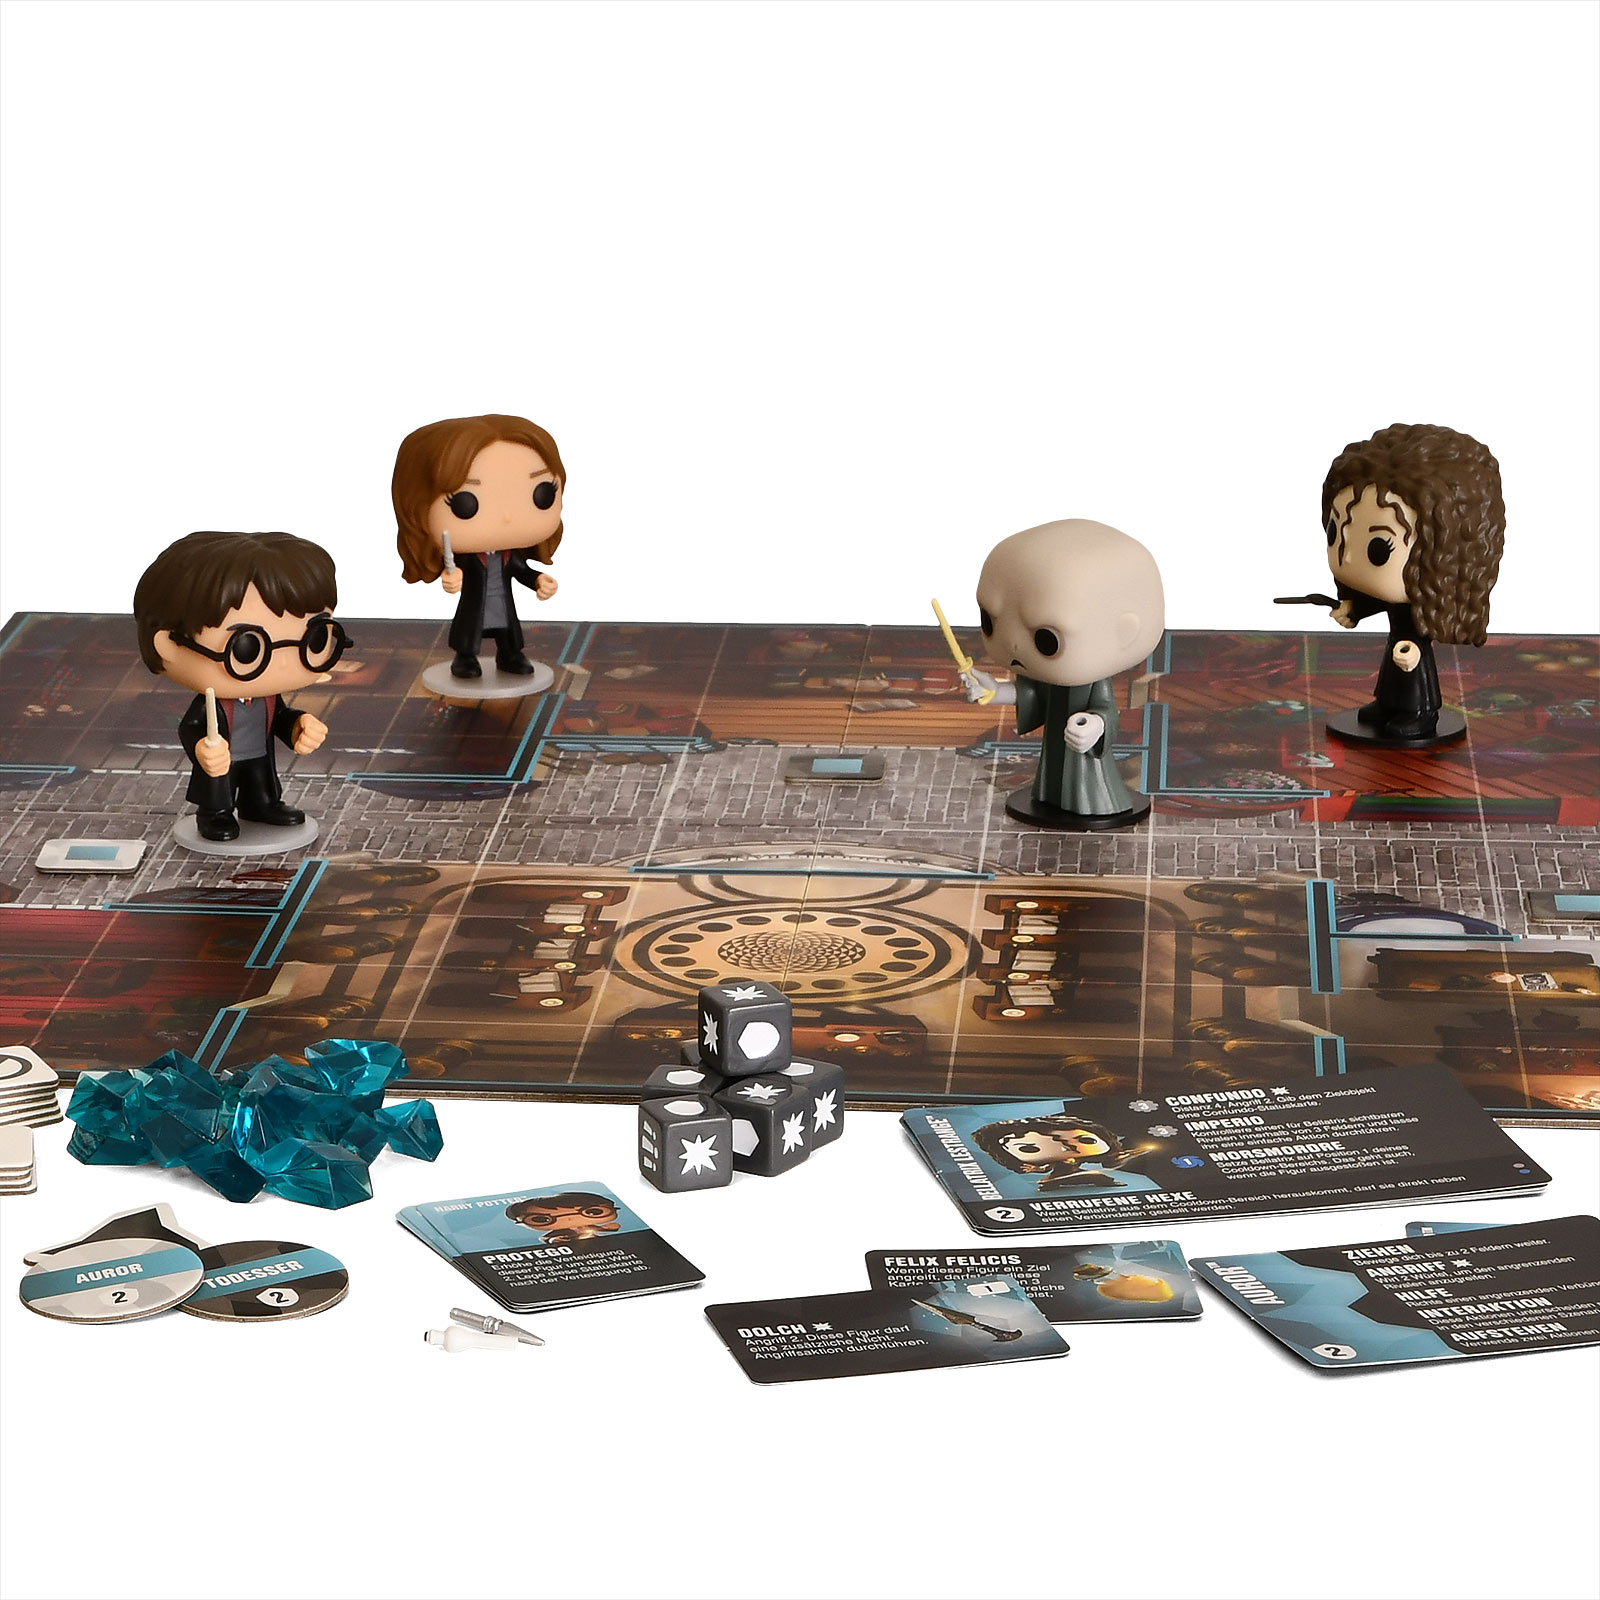 Harry Potter - Funkoverse Board Game